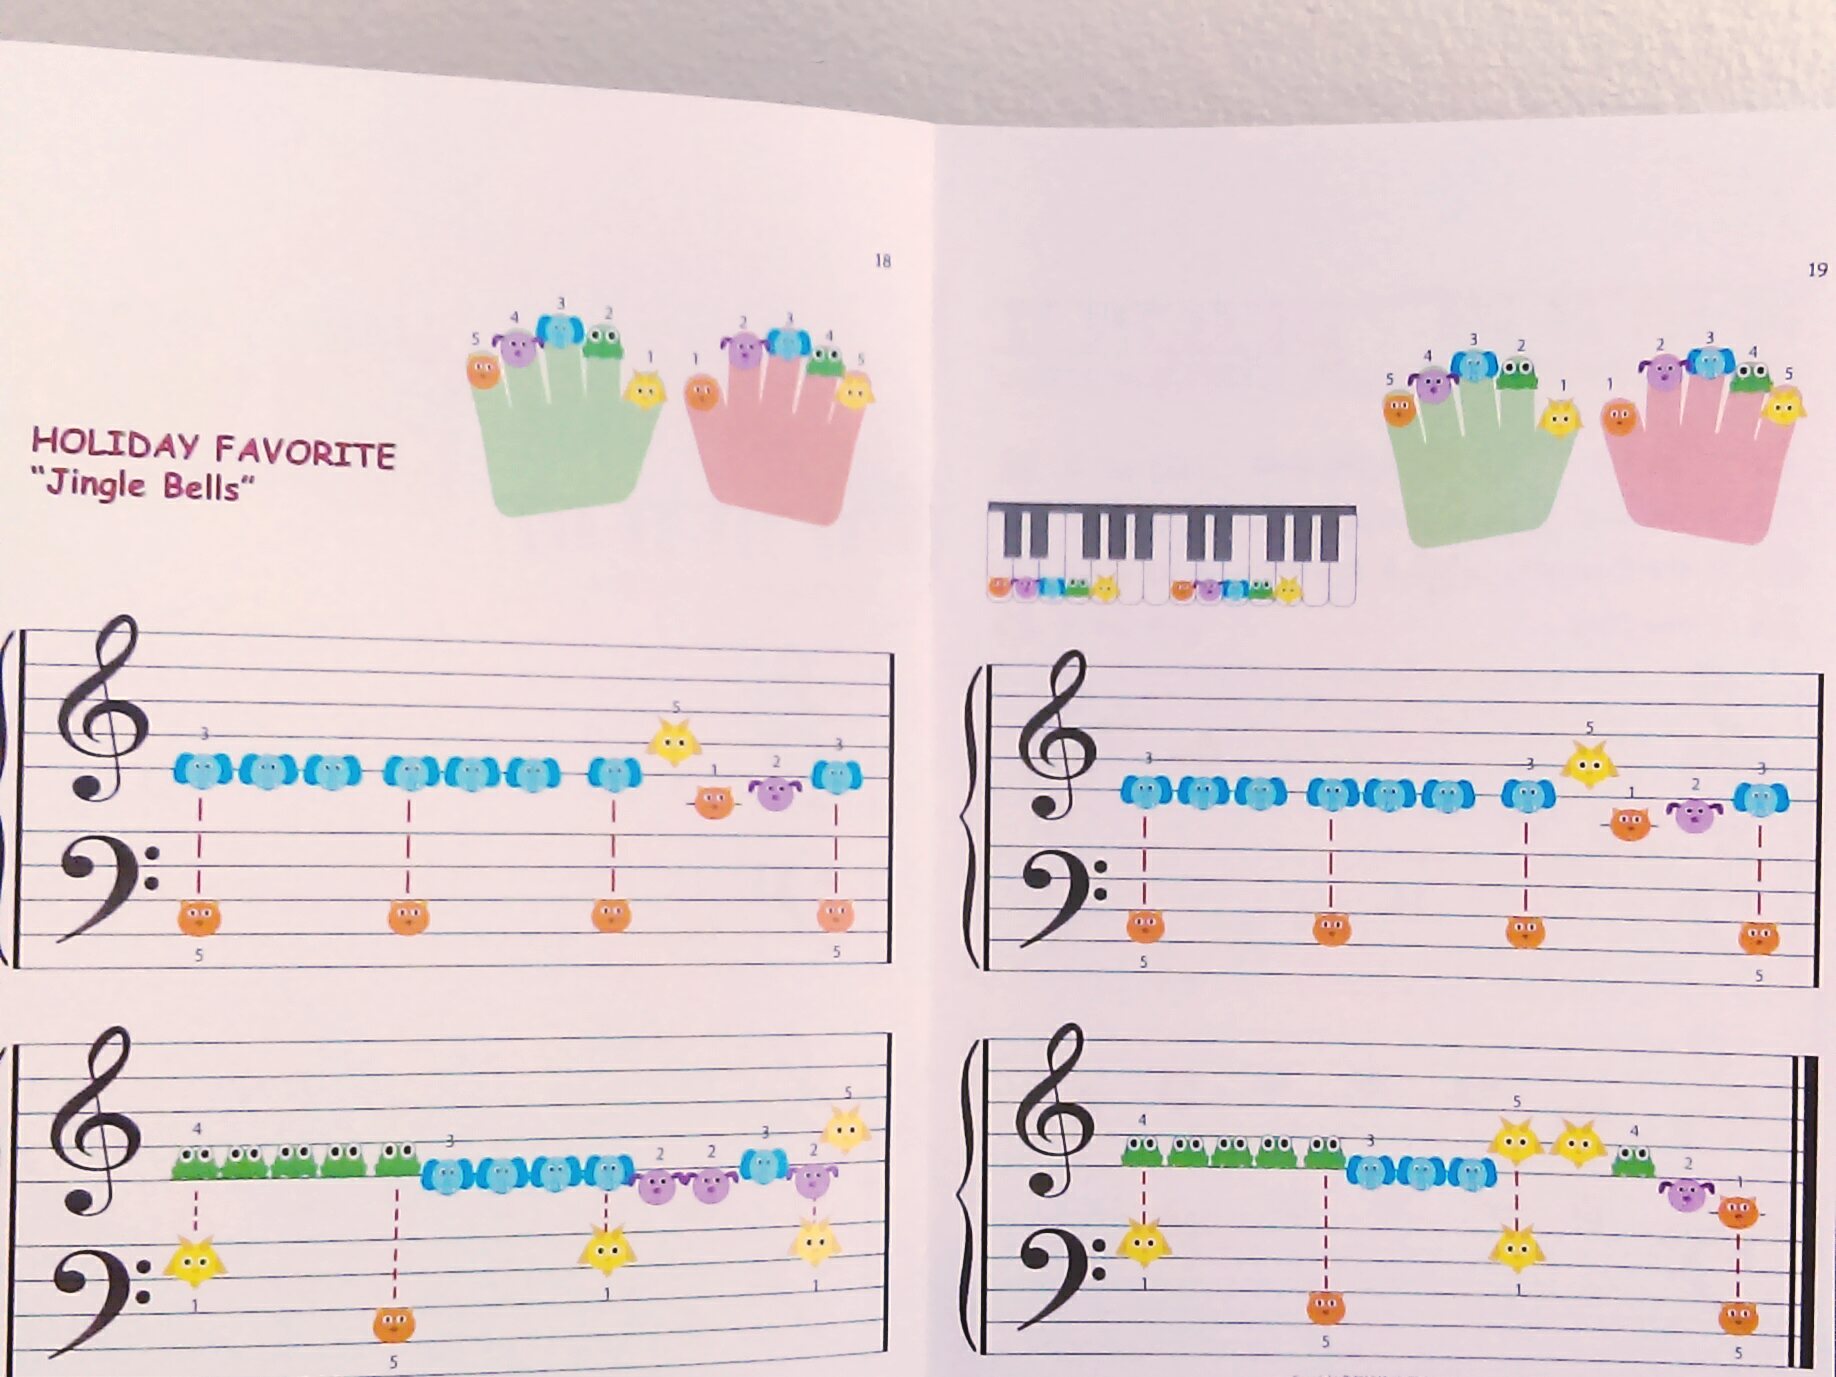 Piano notation for the Holiday favorite Jingle Bells